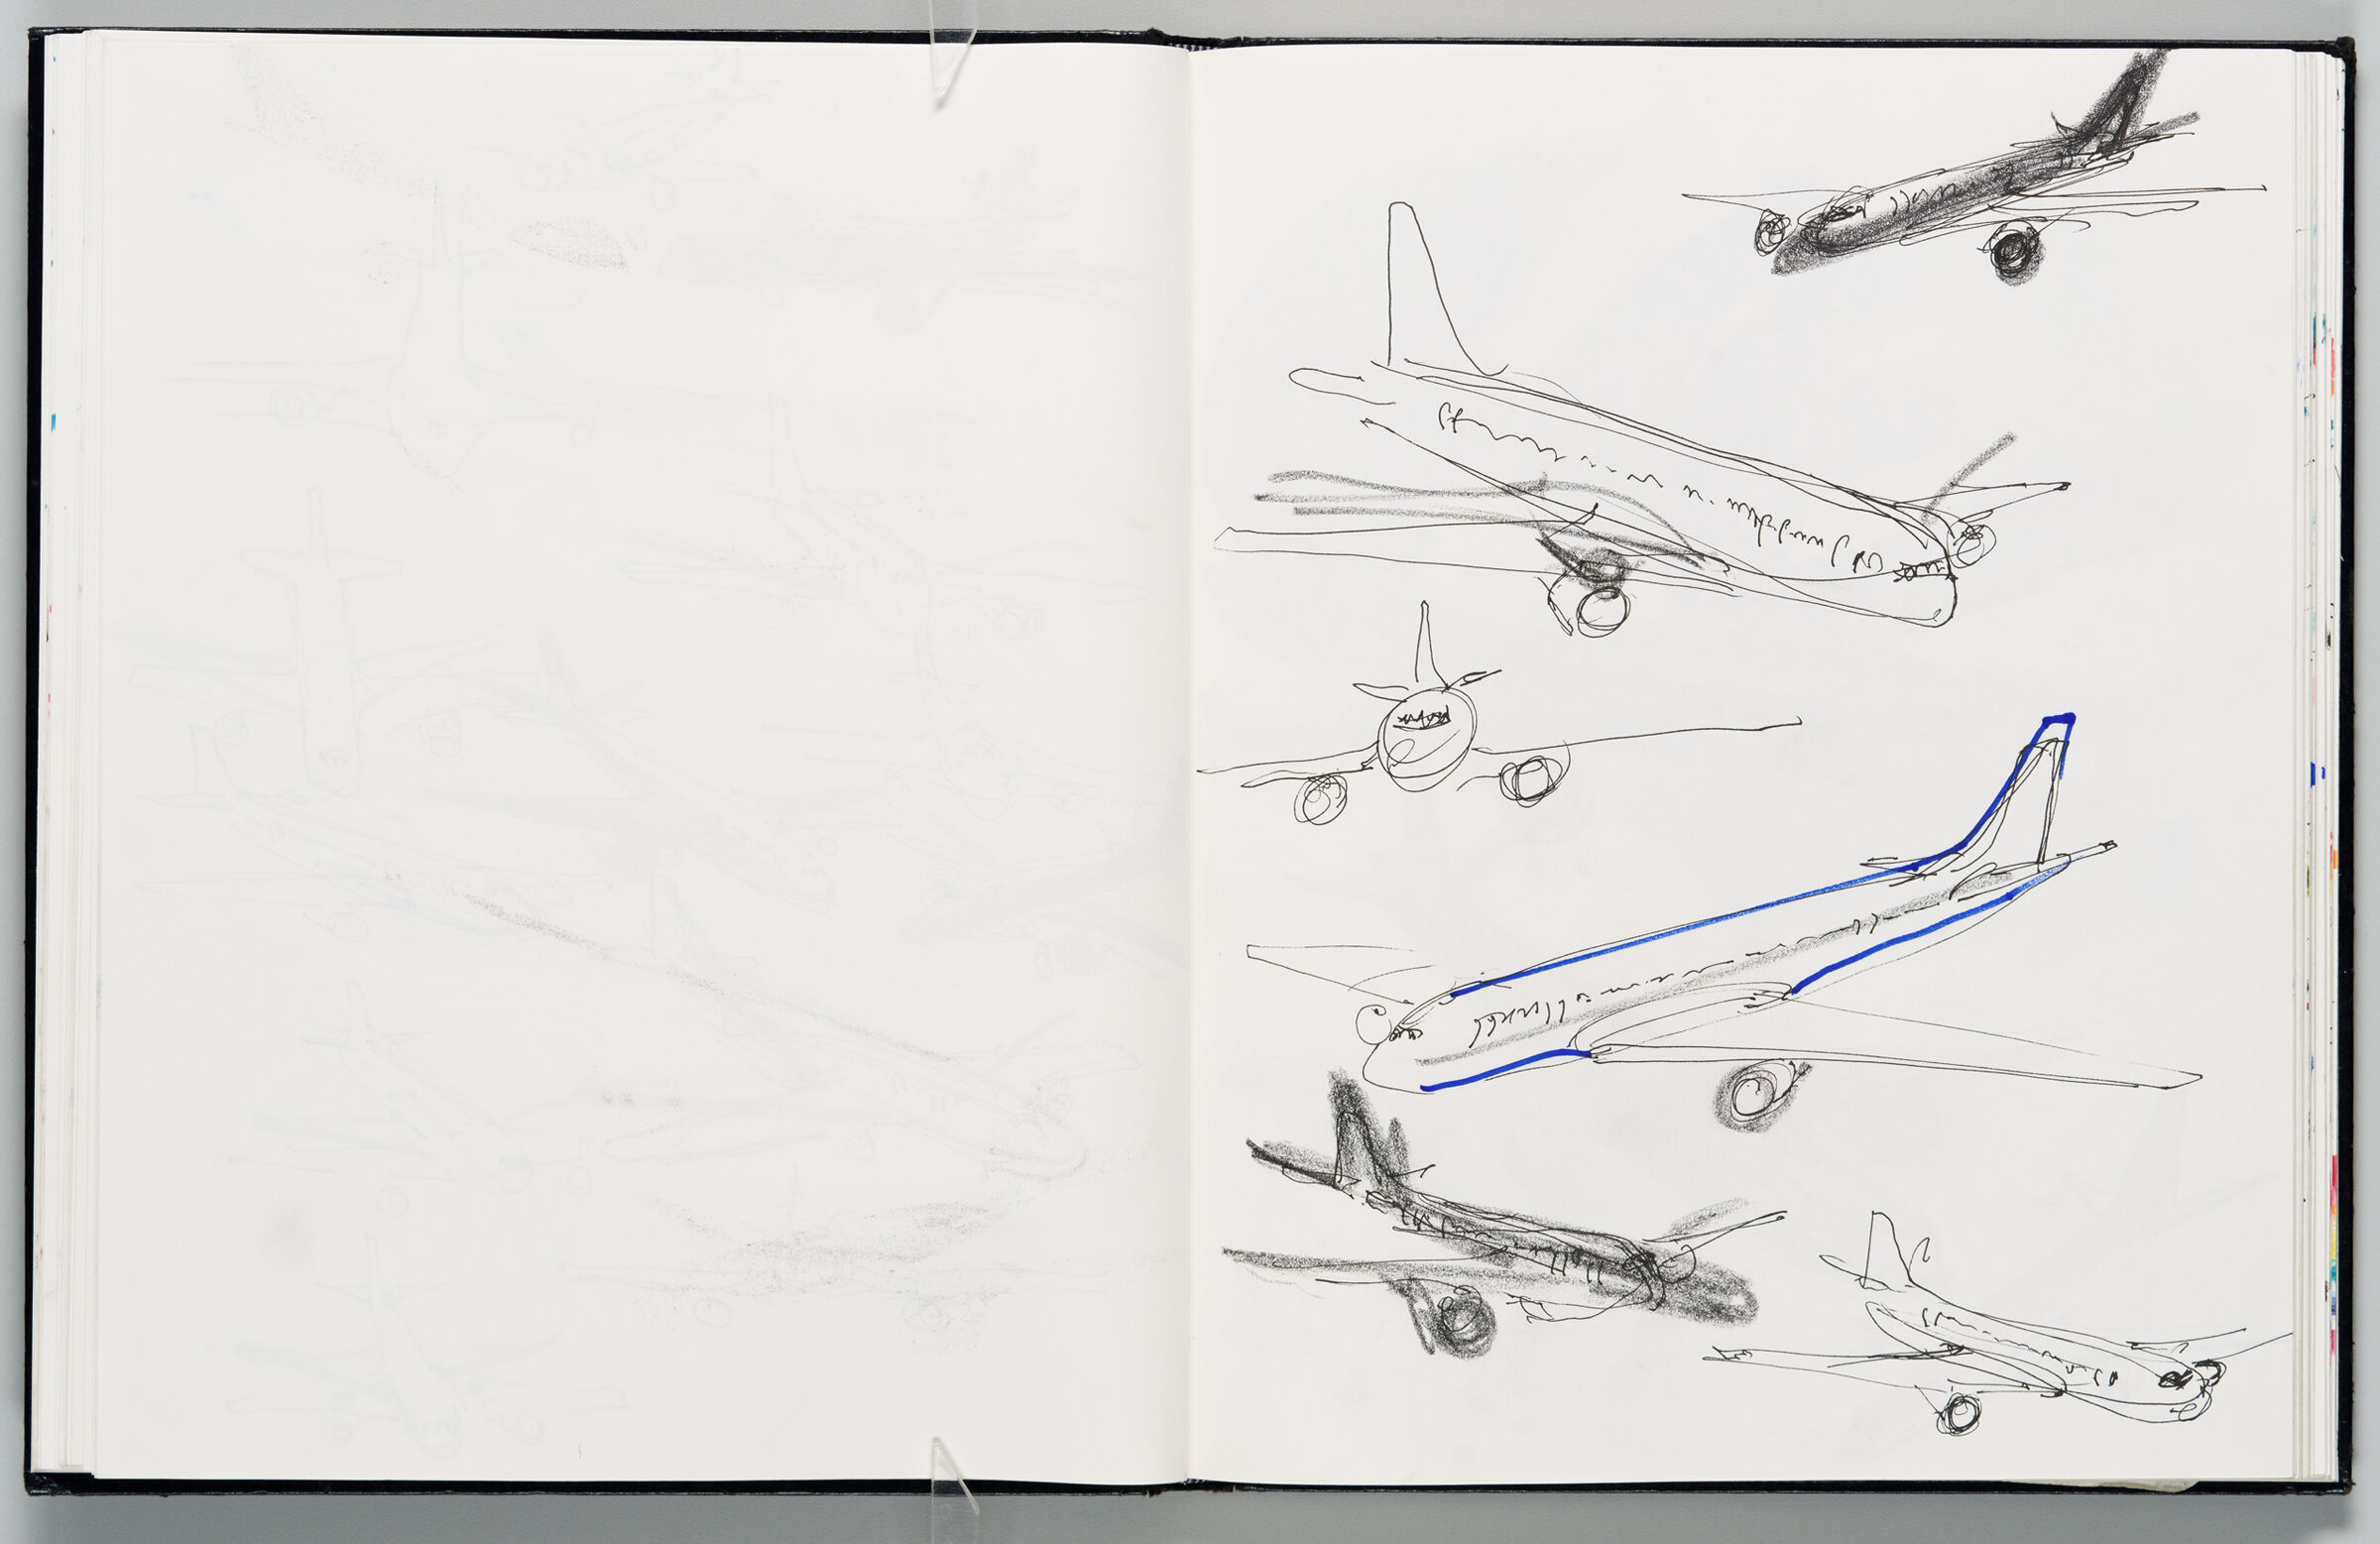 Untitled (Blank With Graphite Transfer, Left Page); Untitled (Designs For Condor Planes, Right Page)